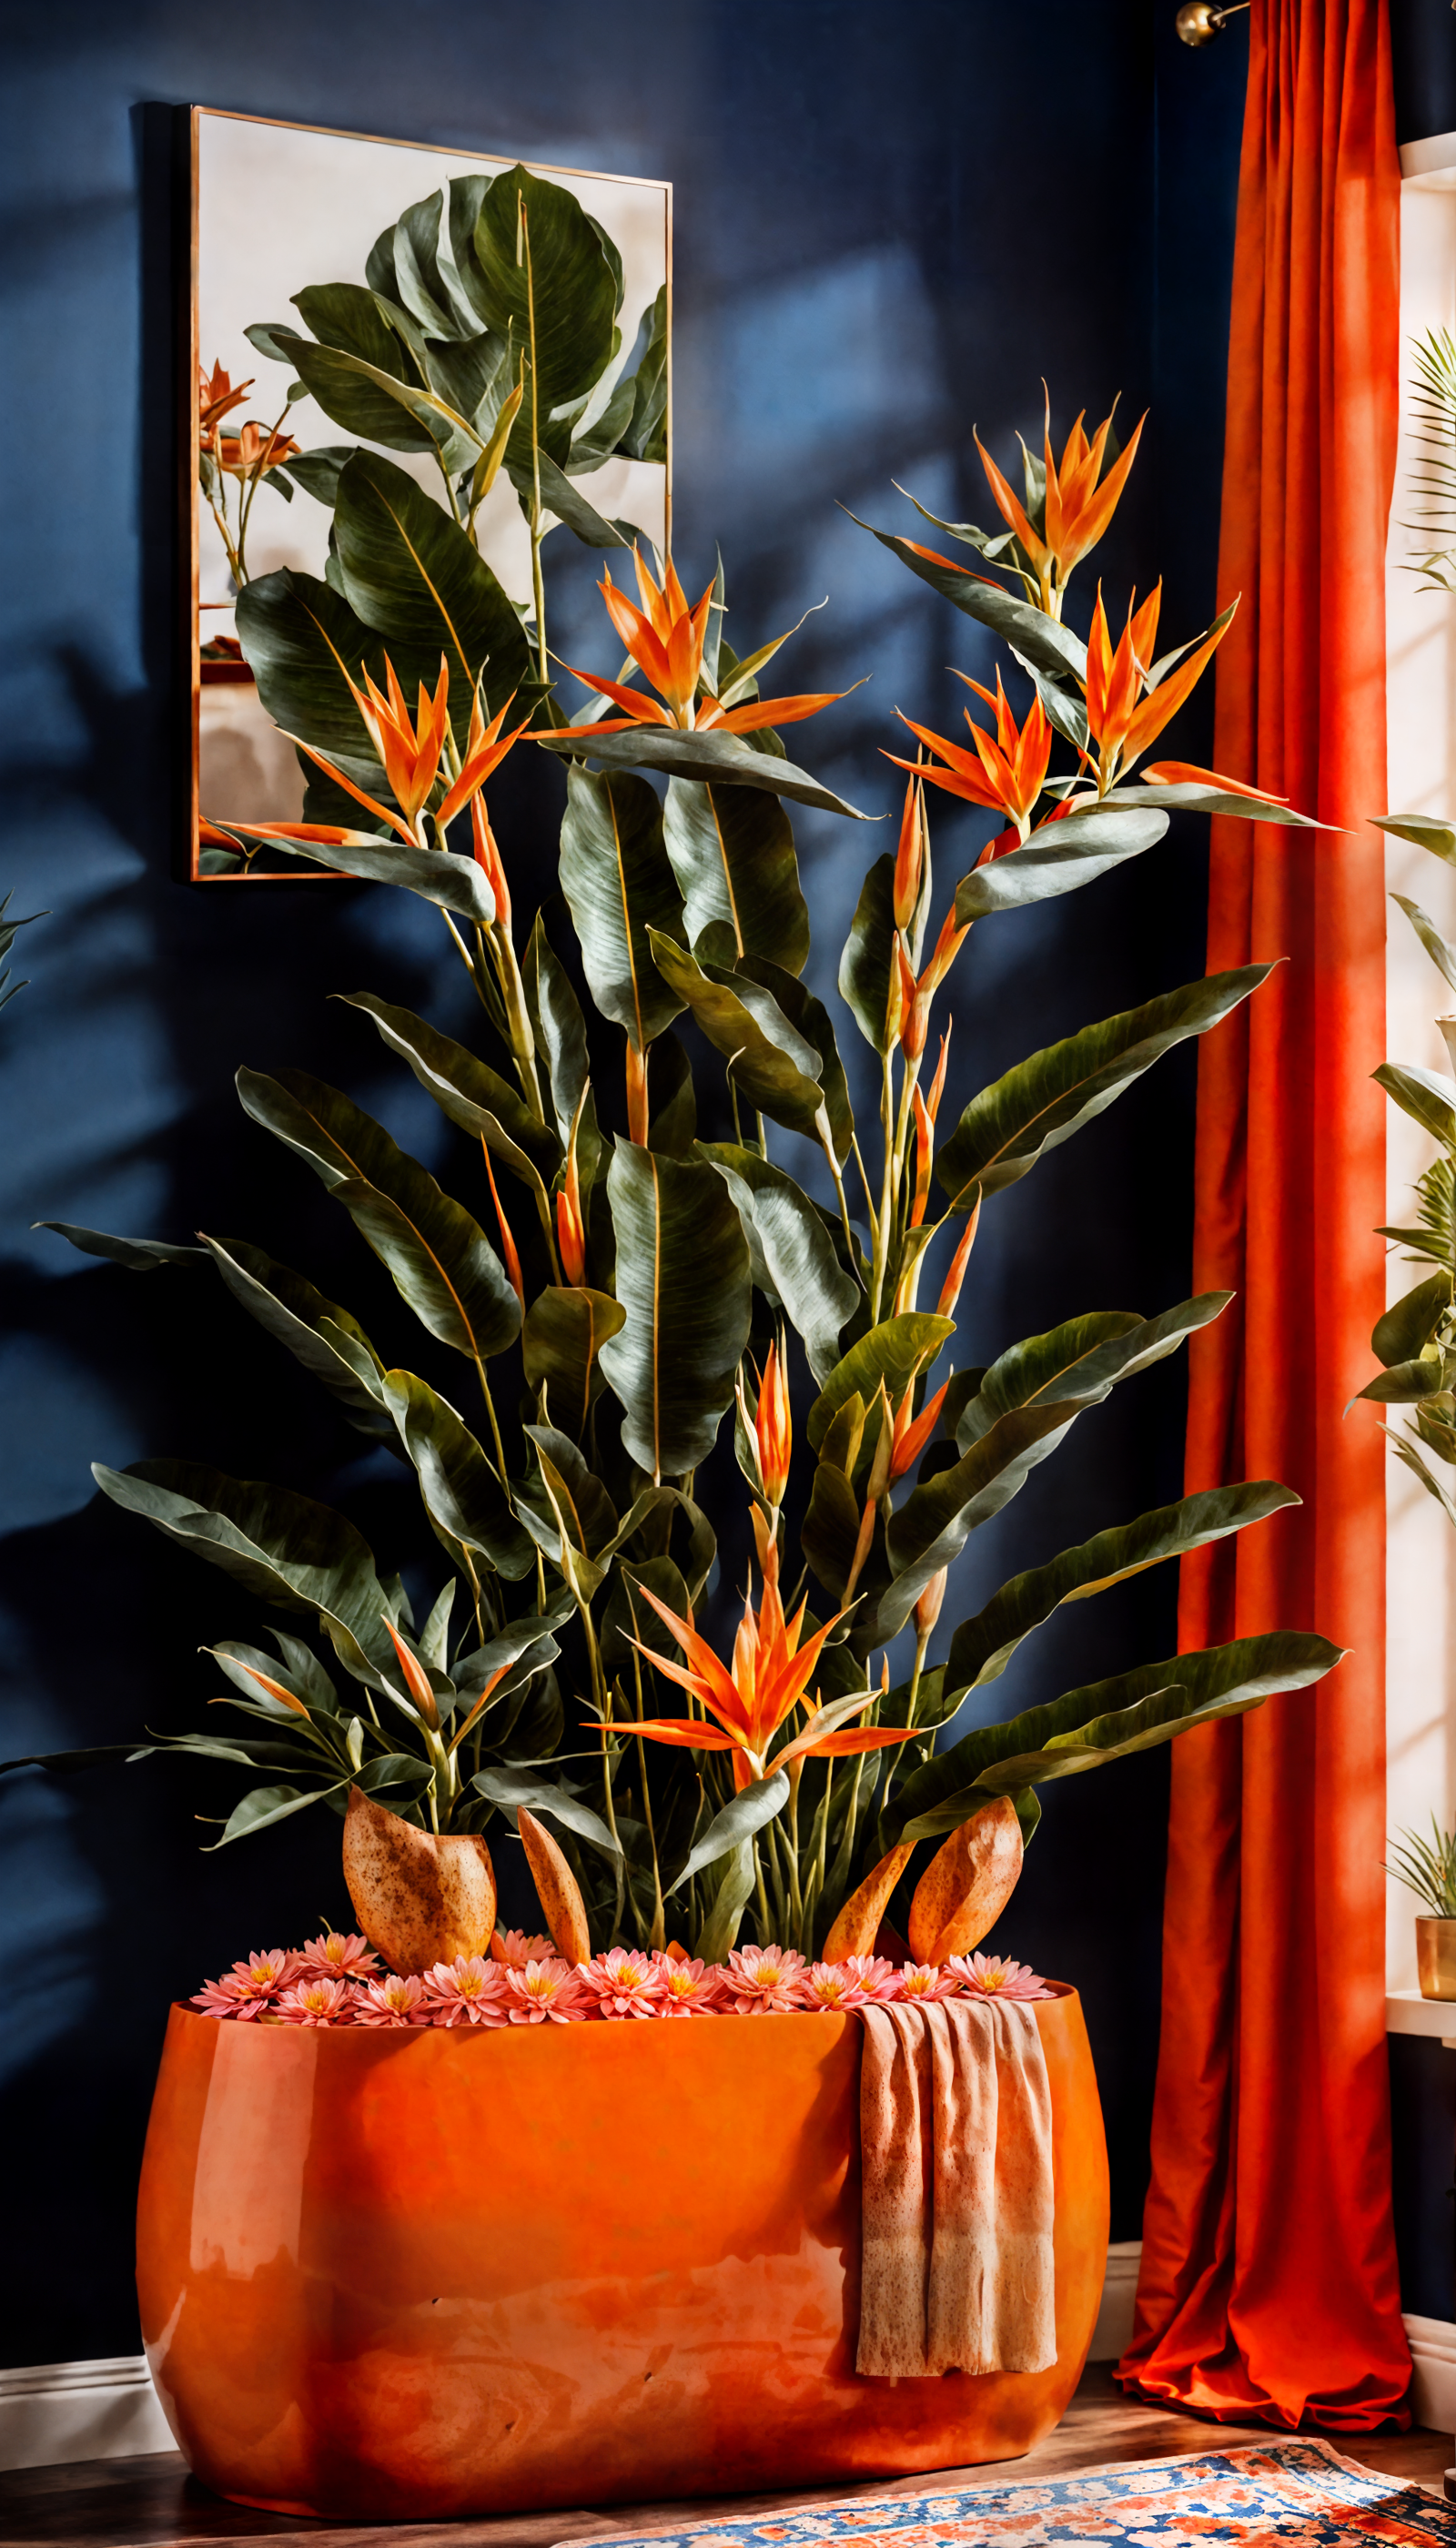 Strelitzia reginae, or Bird of Paradise, in a modern indoor setting with clear lighting.